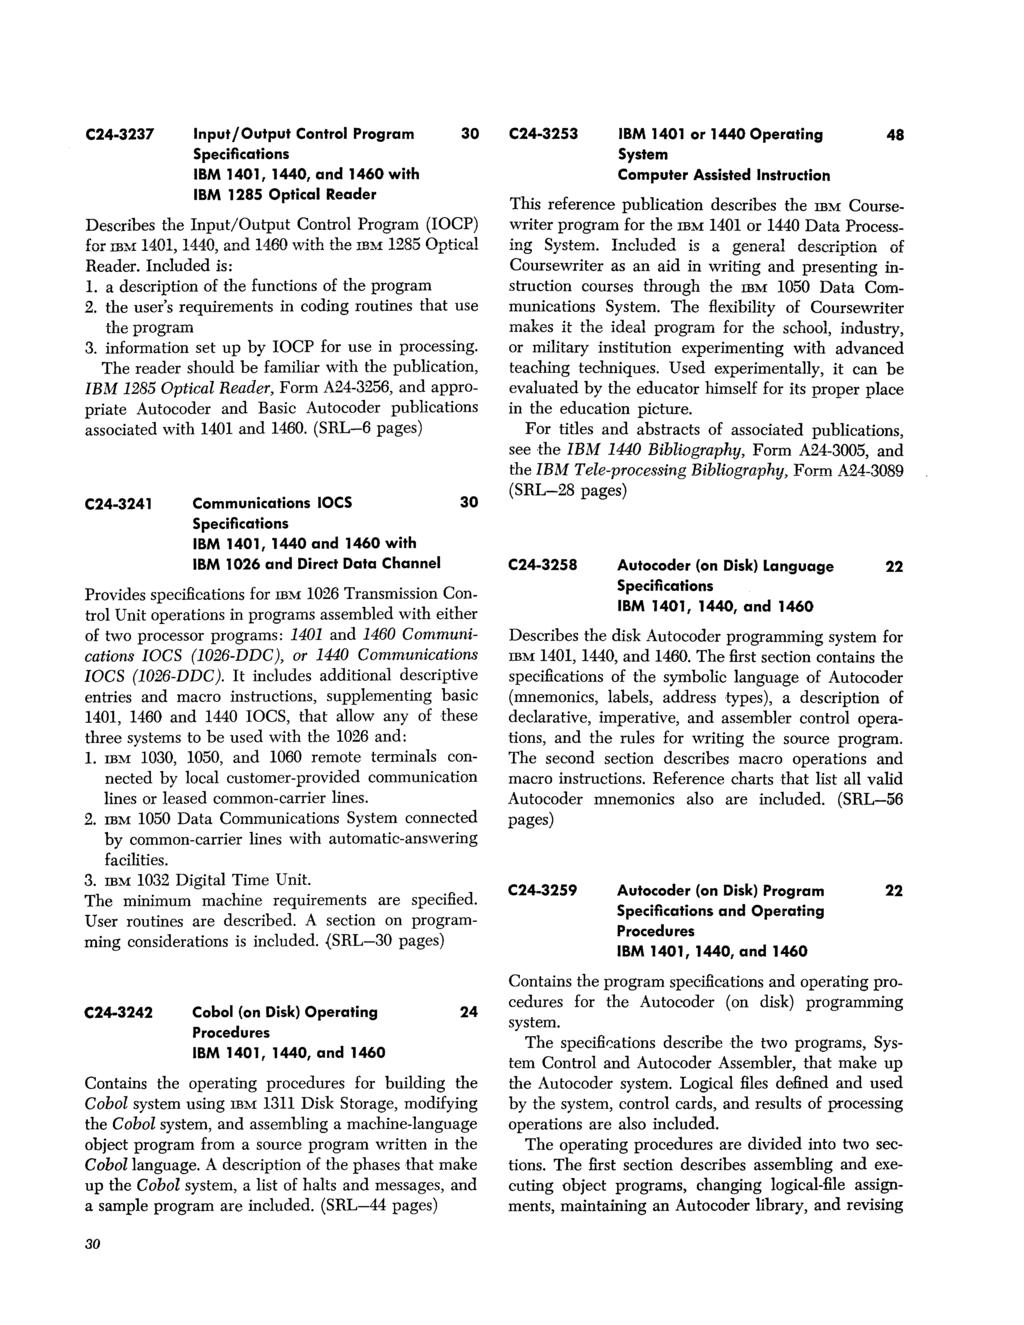 C24-3237 Input / Output Control Program 30 Specifications IBM 1401,1440, and 1460 with IBM 1285 Optical Reader Describes the Input/Output Control Program (IOCP) for IBl"f 1401, 1440, and 1460 \vith